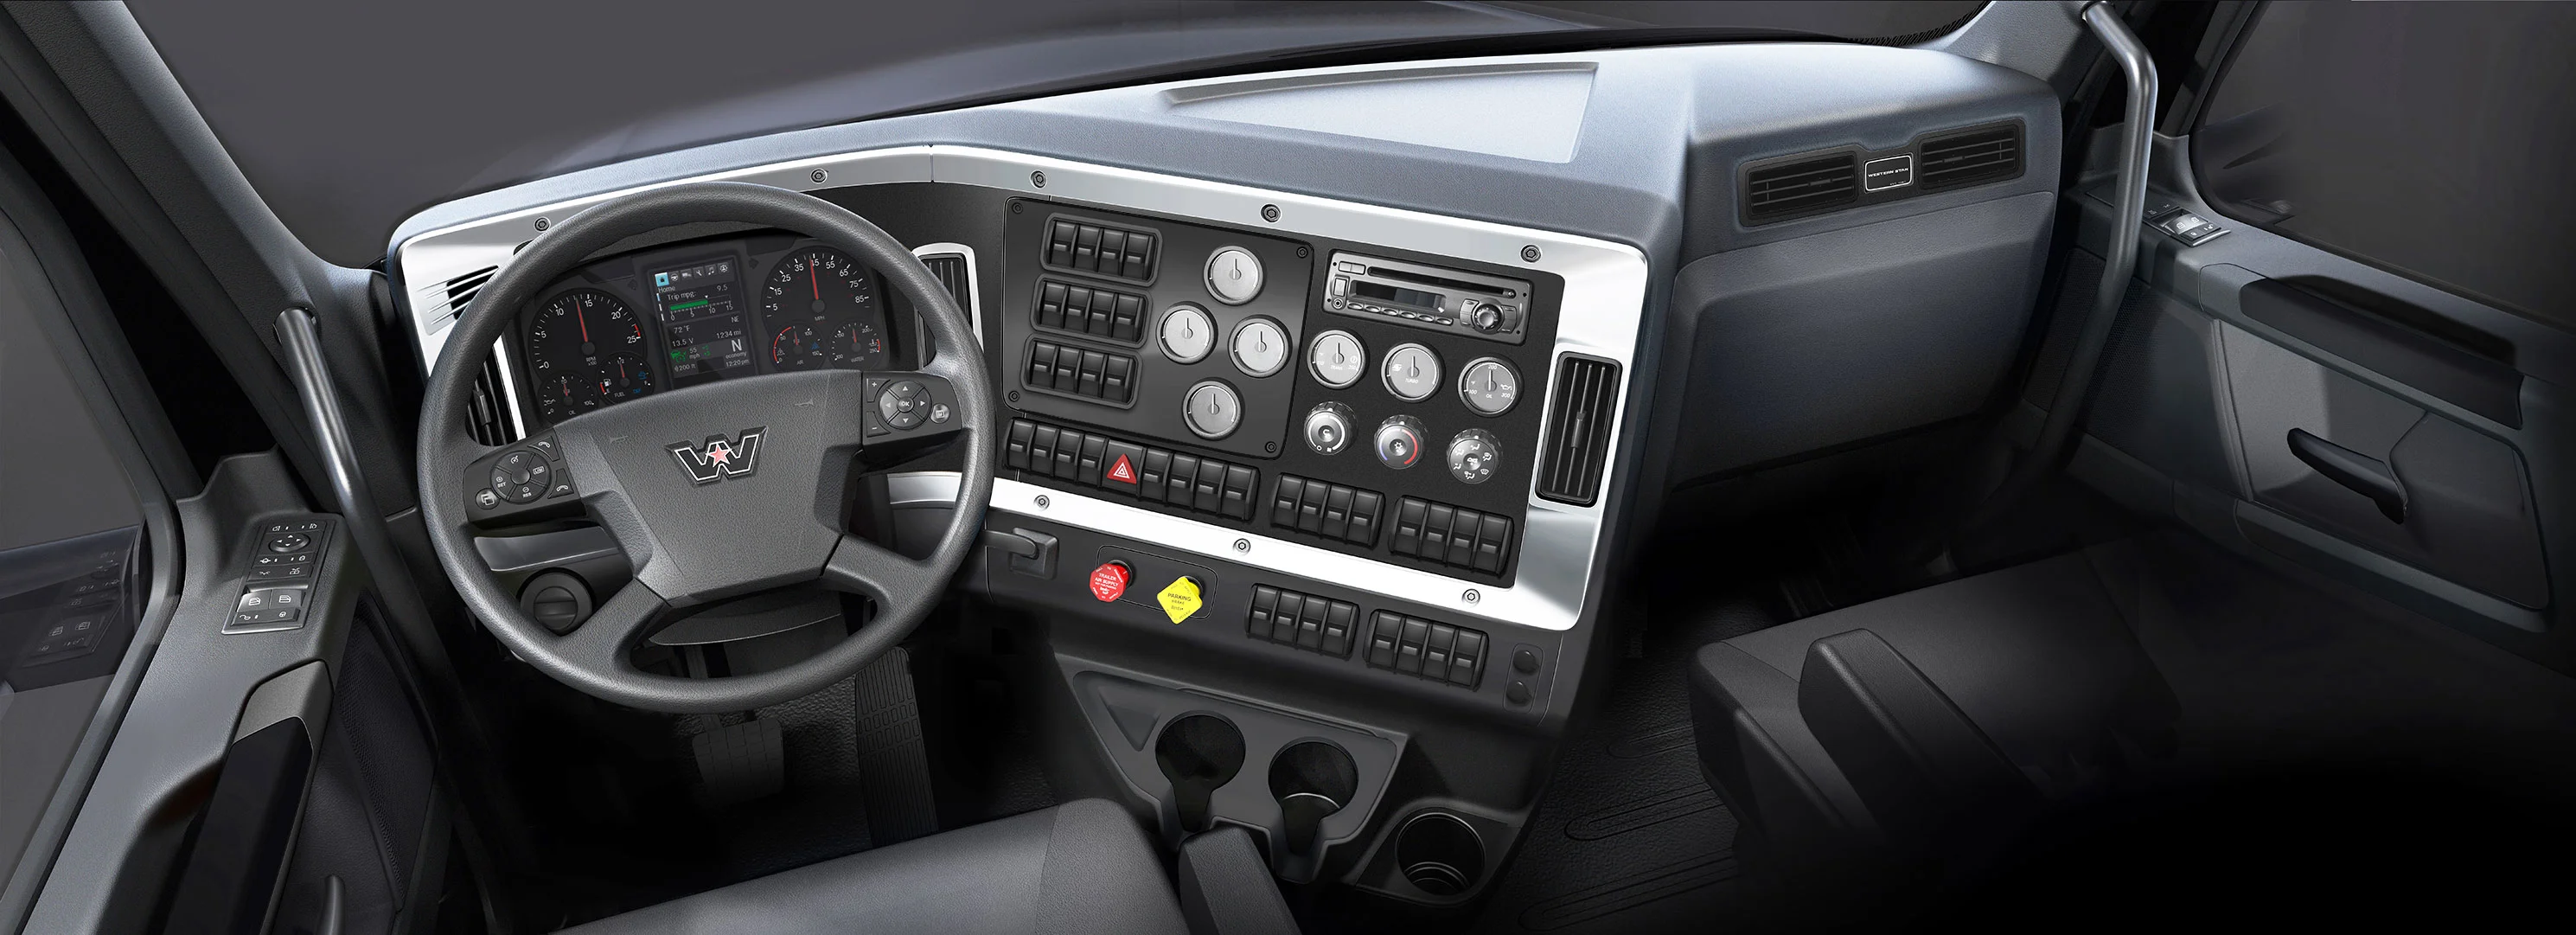 Western Star X Series Interior Dashboard View with Quarry Grey Finish